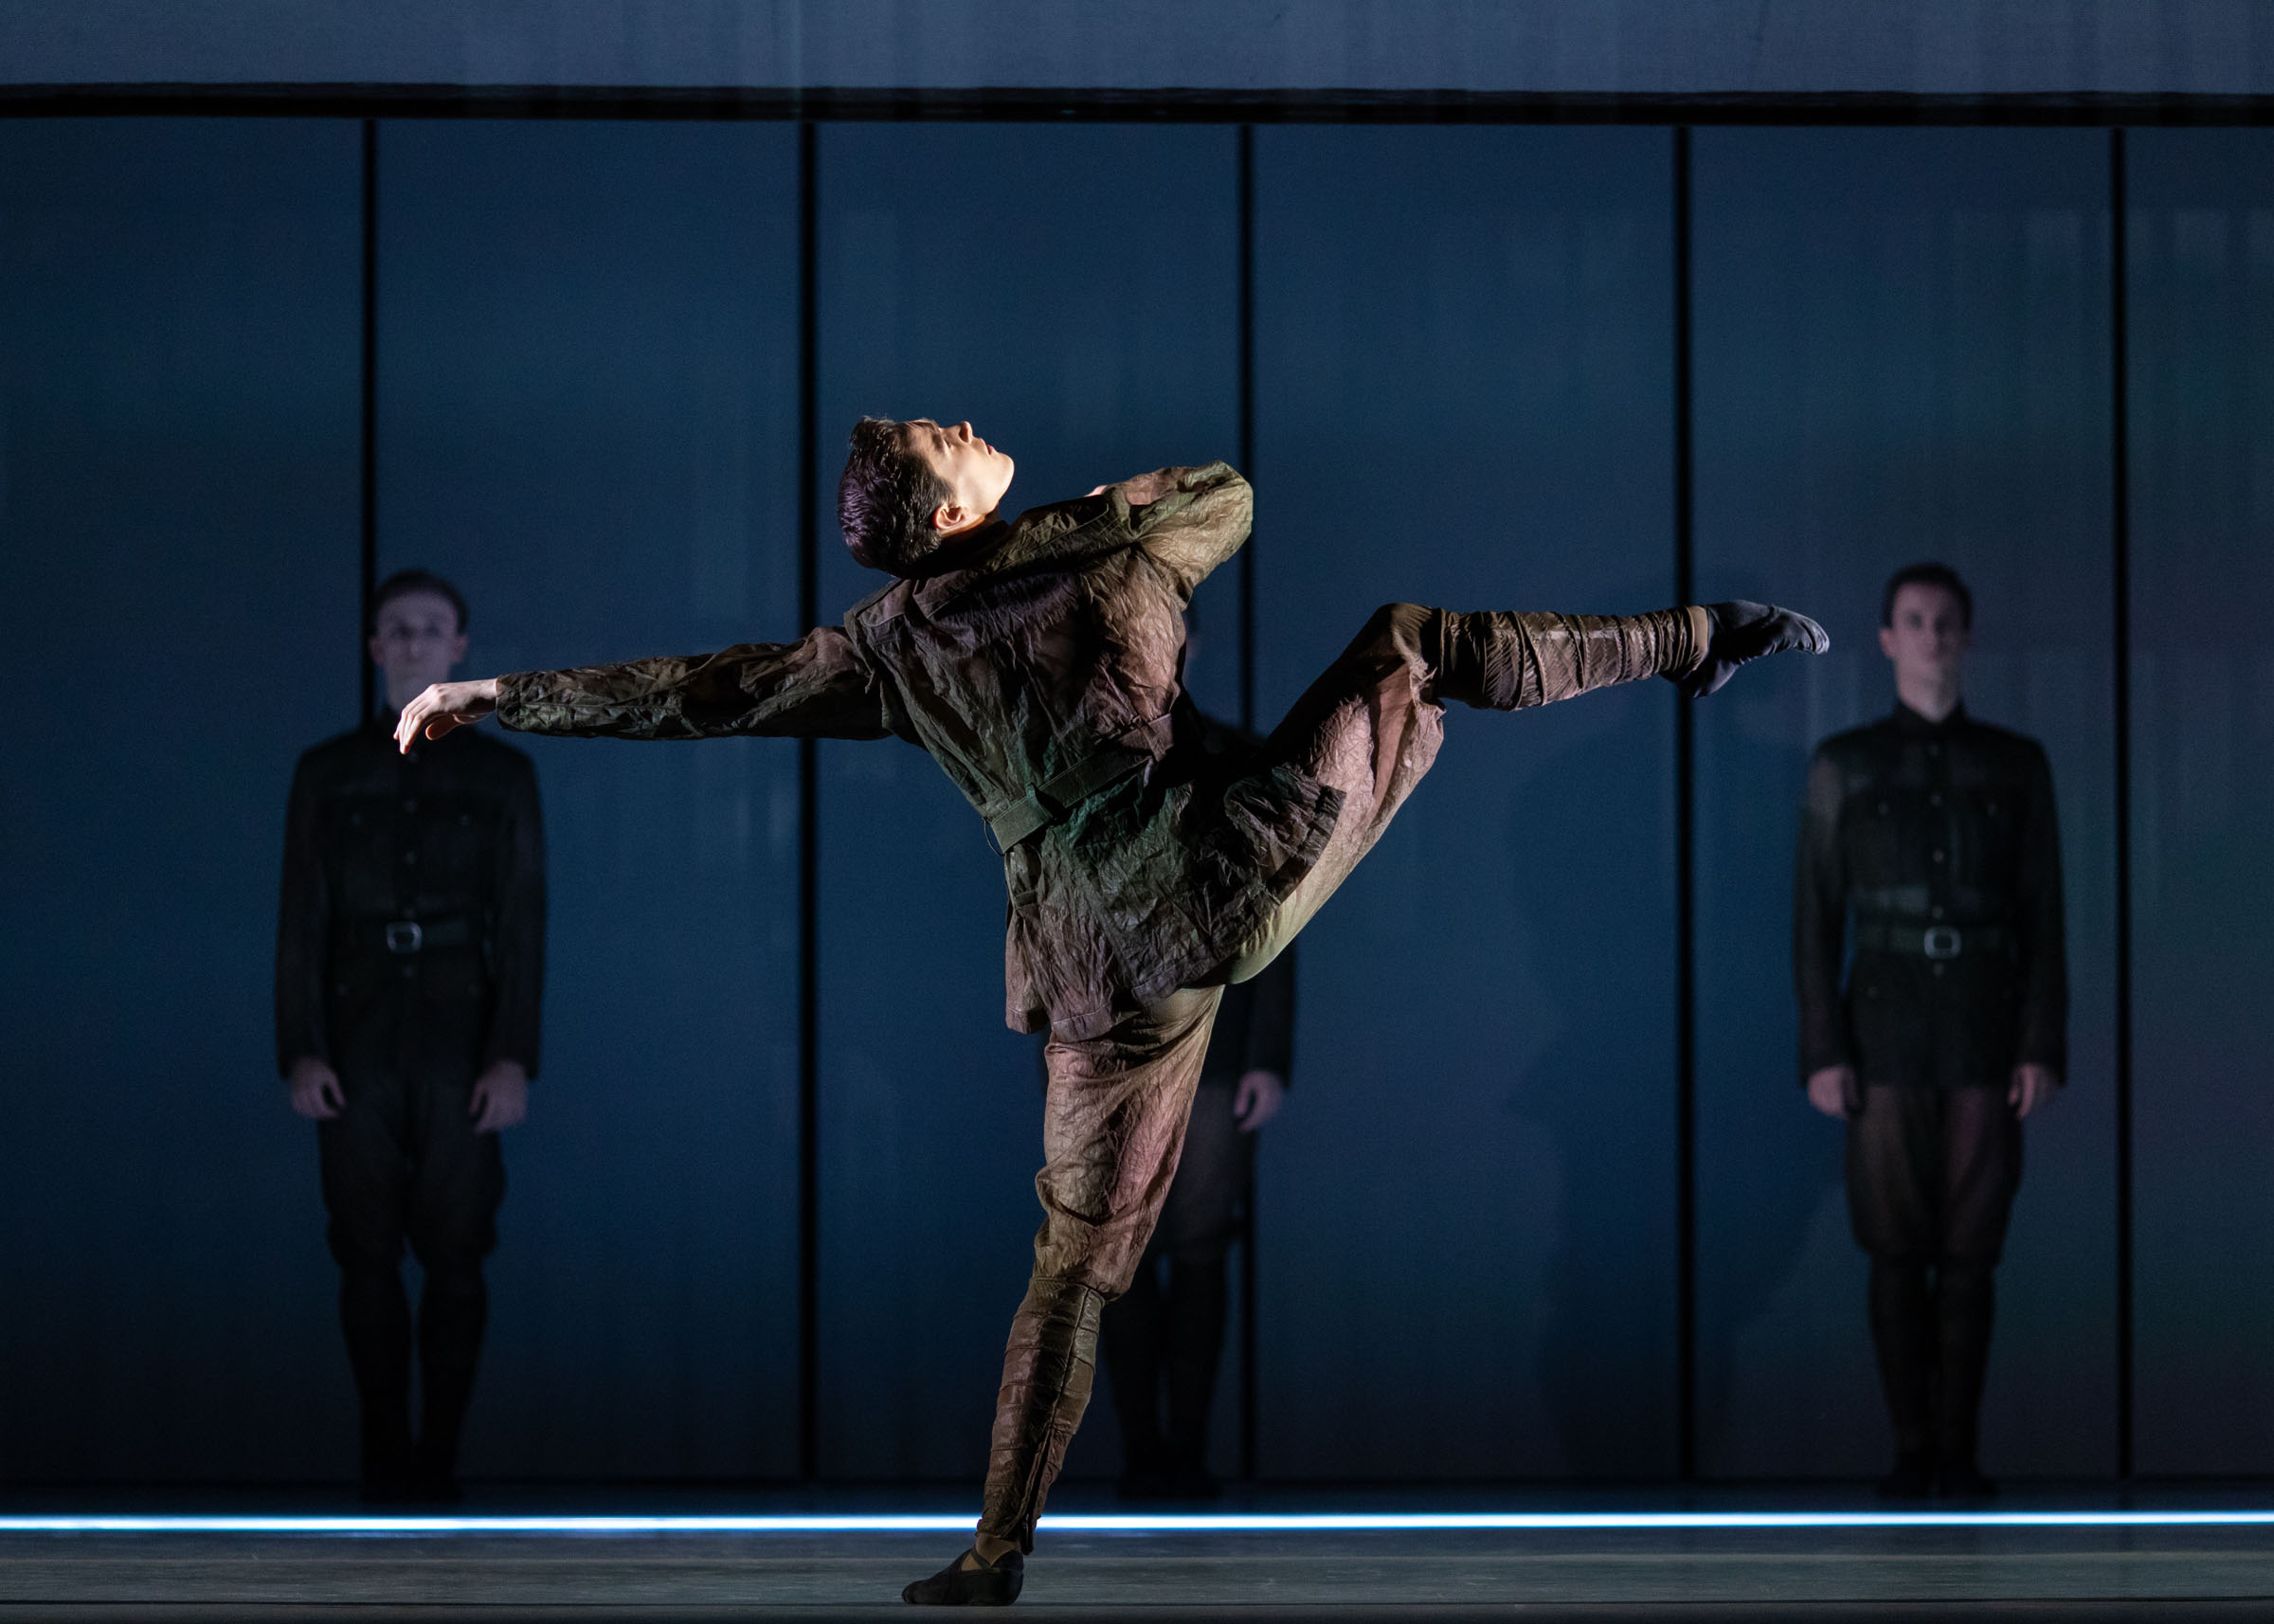 William Bracewell as Ted Feltham in Alastair Marriott's The Unknown Soldier, The Royal Ballet